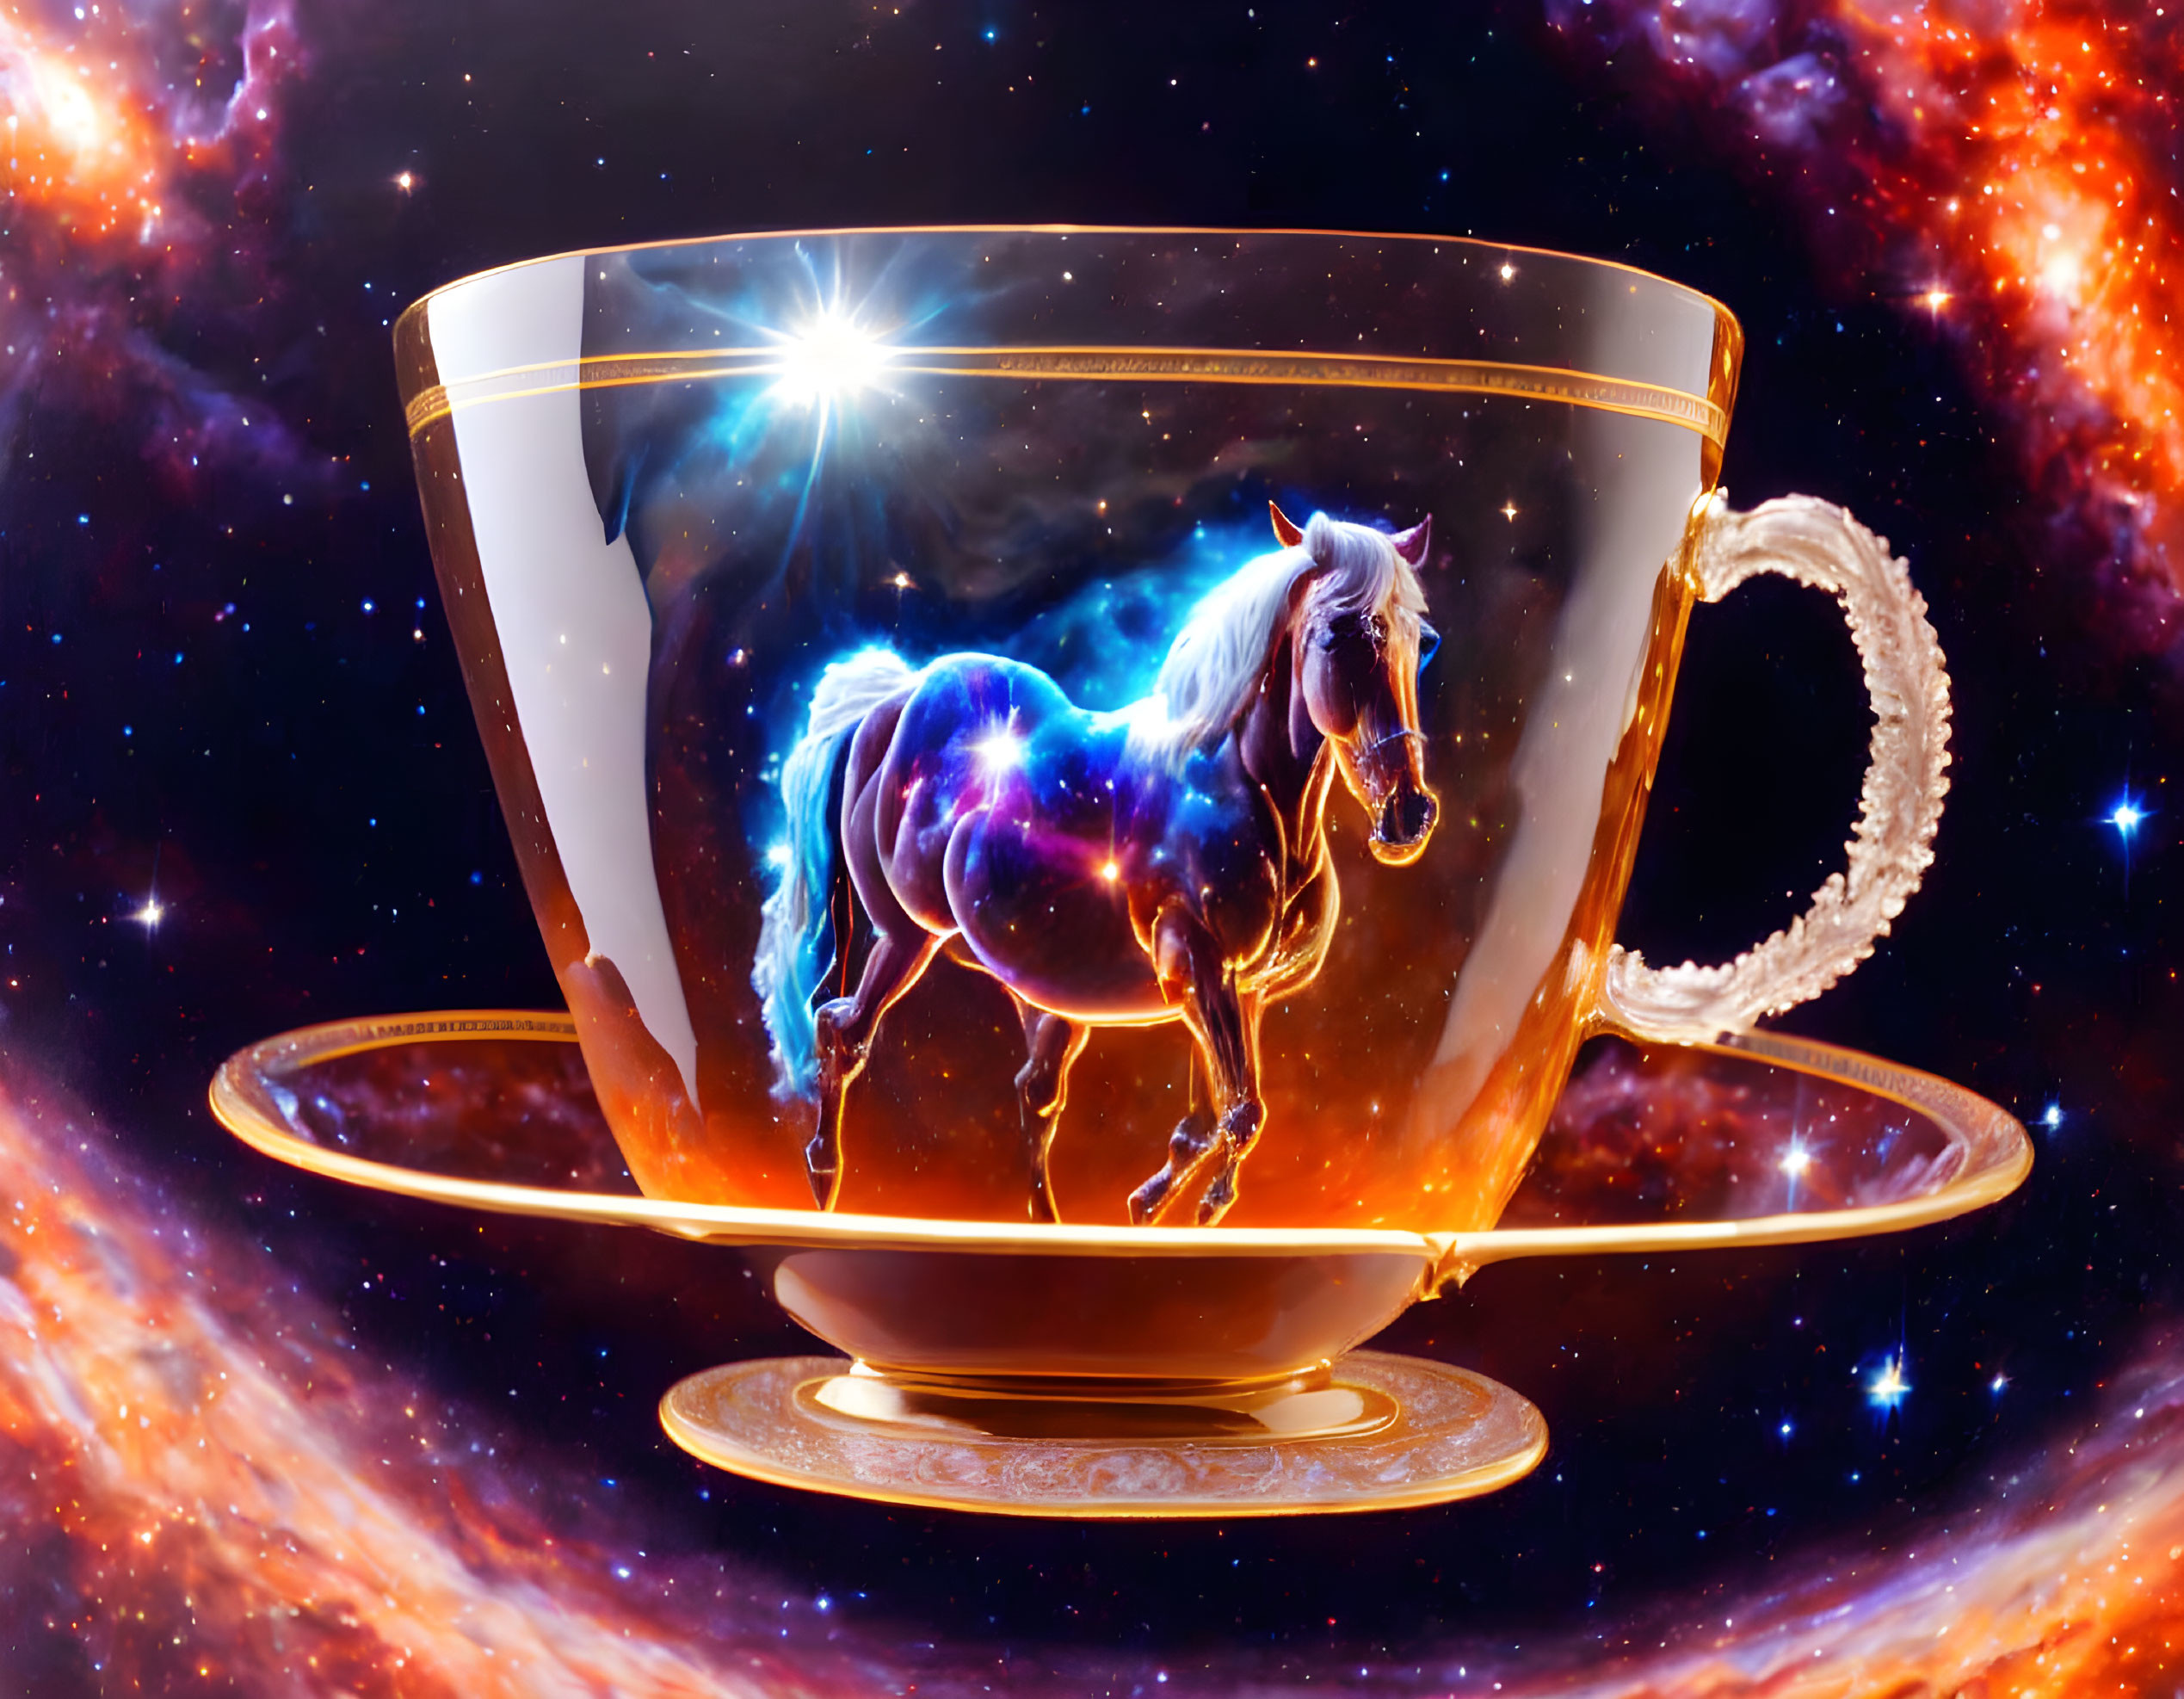 Cosmic-themed teacup and saucer with nebula and galaxy horse design